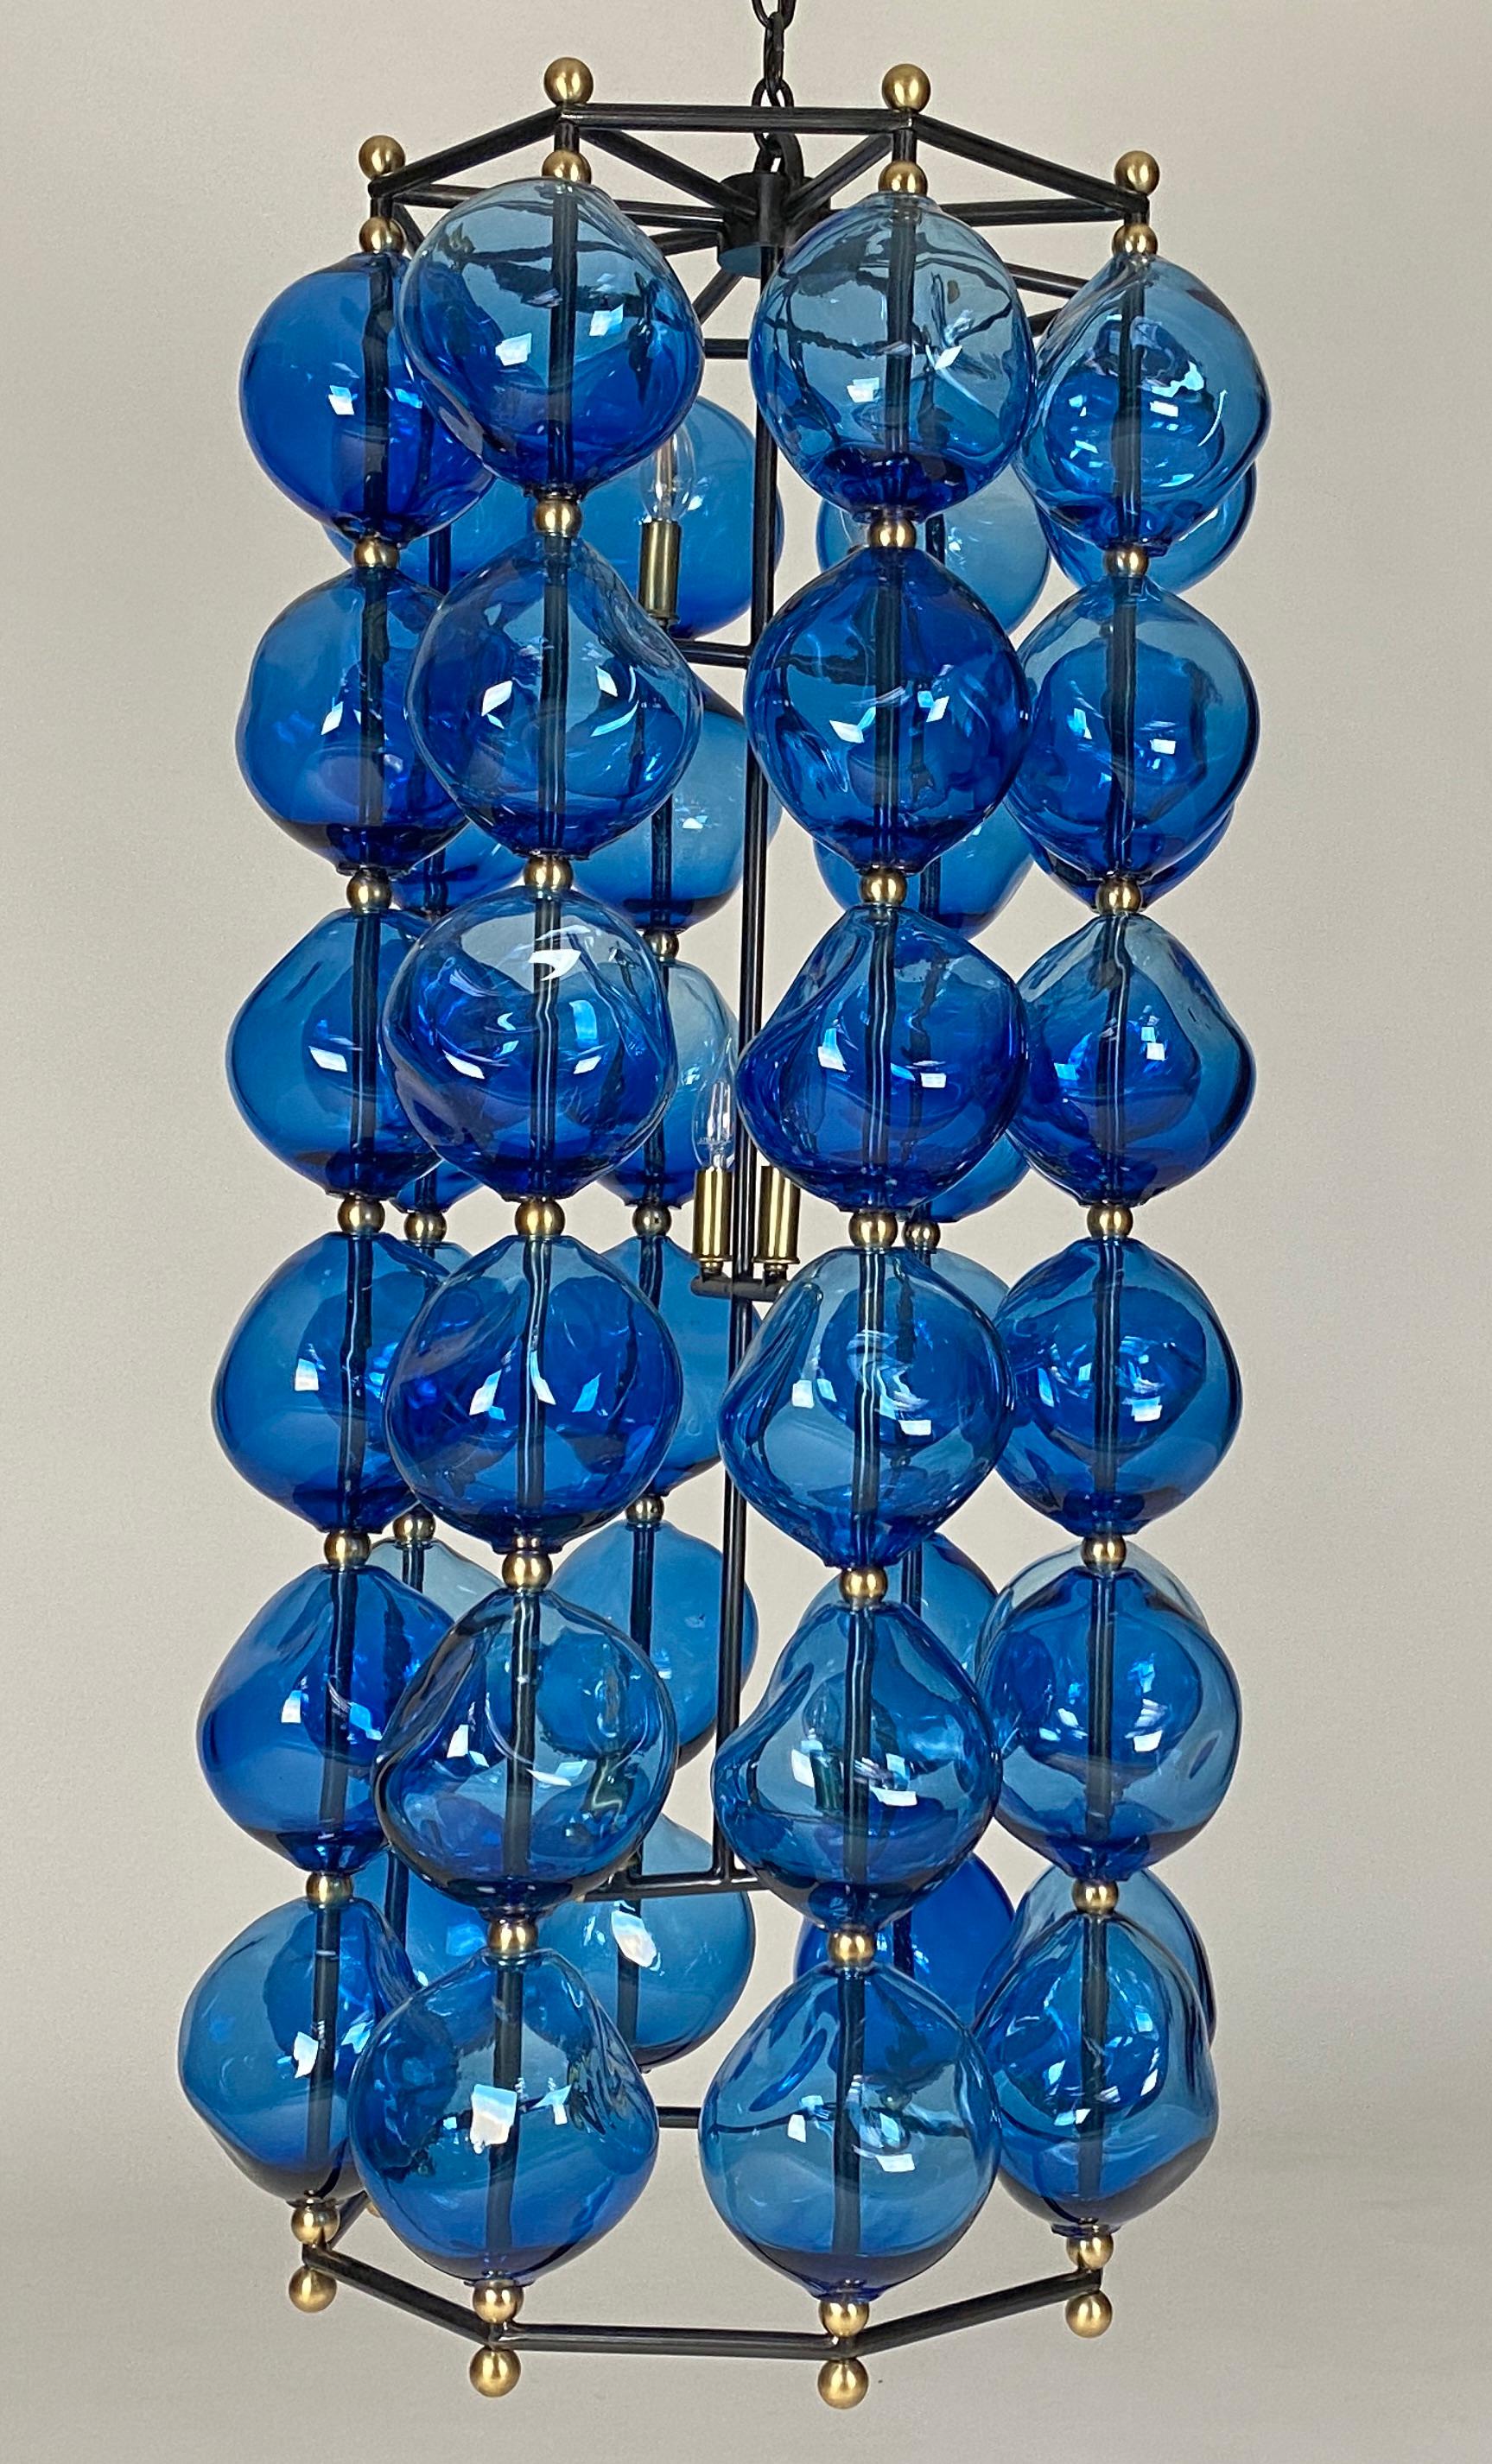 Steel and hand blown glass chandelier. 48 aqua blue glass stones. Gun metal steel frame and brass accents. 4 candelabras base sockets
Custom sizes available